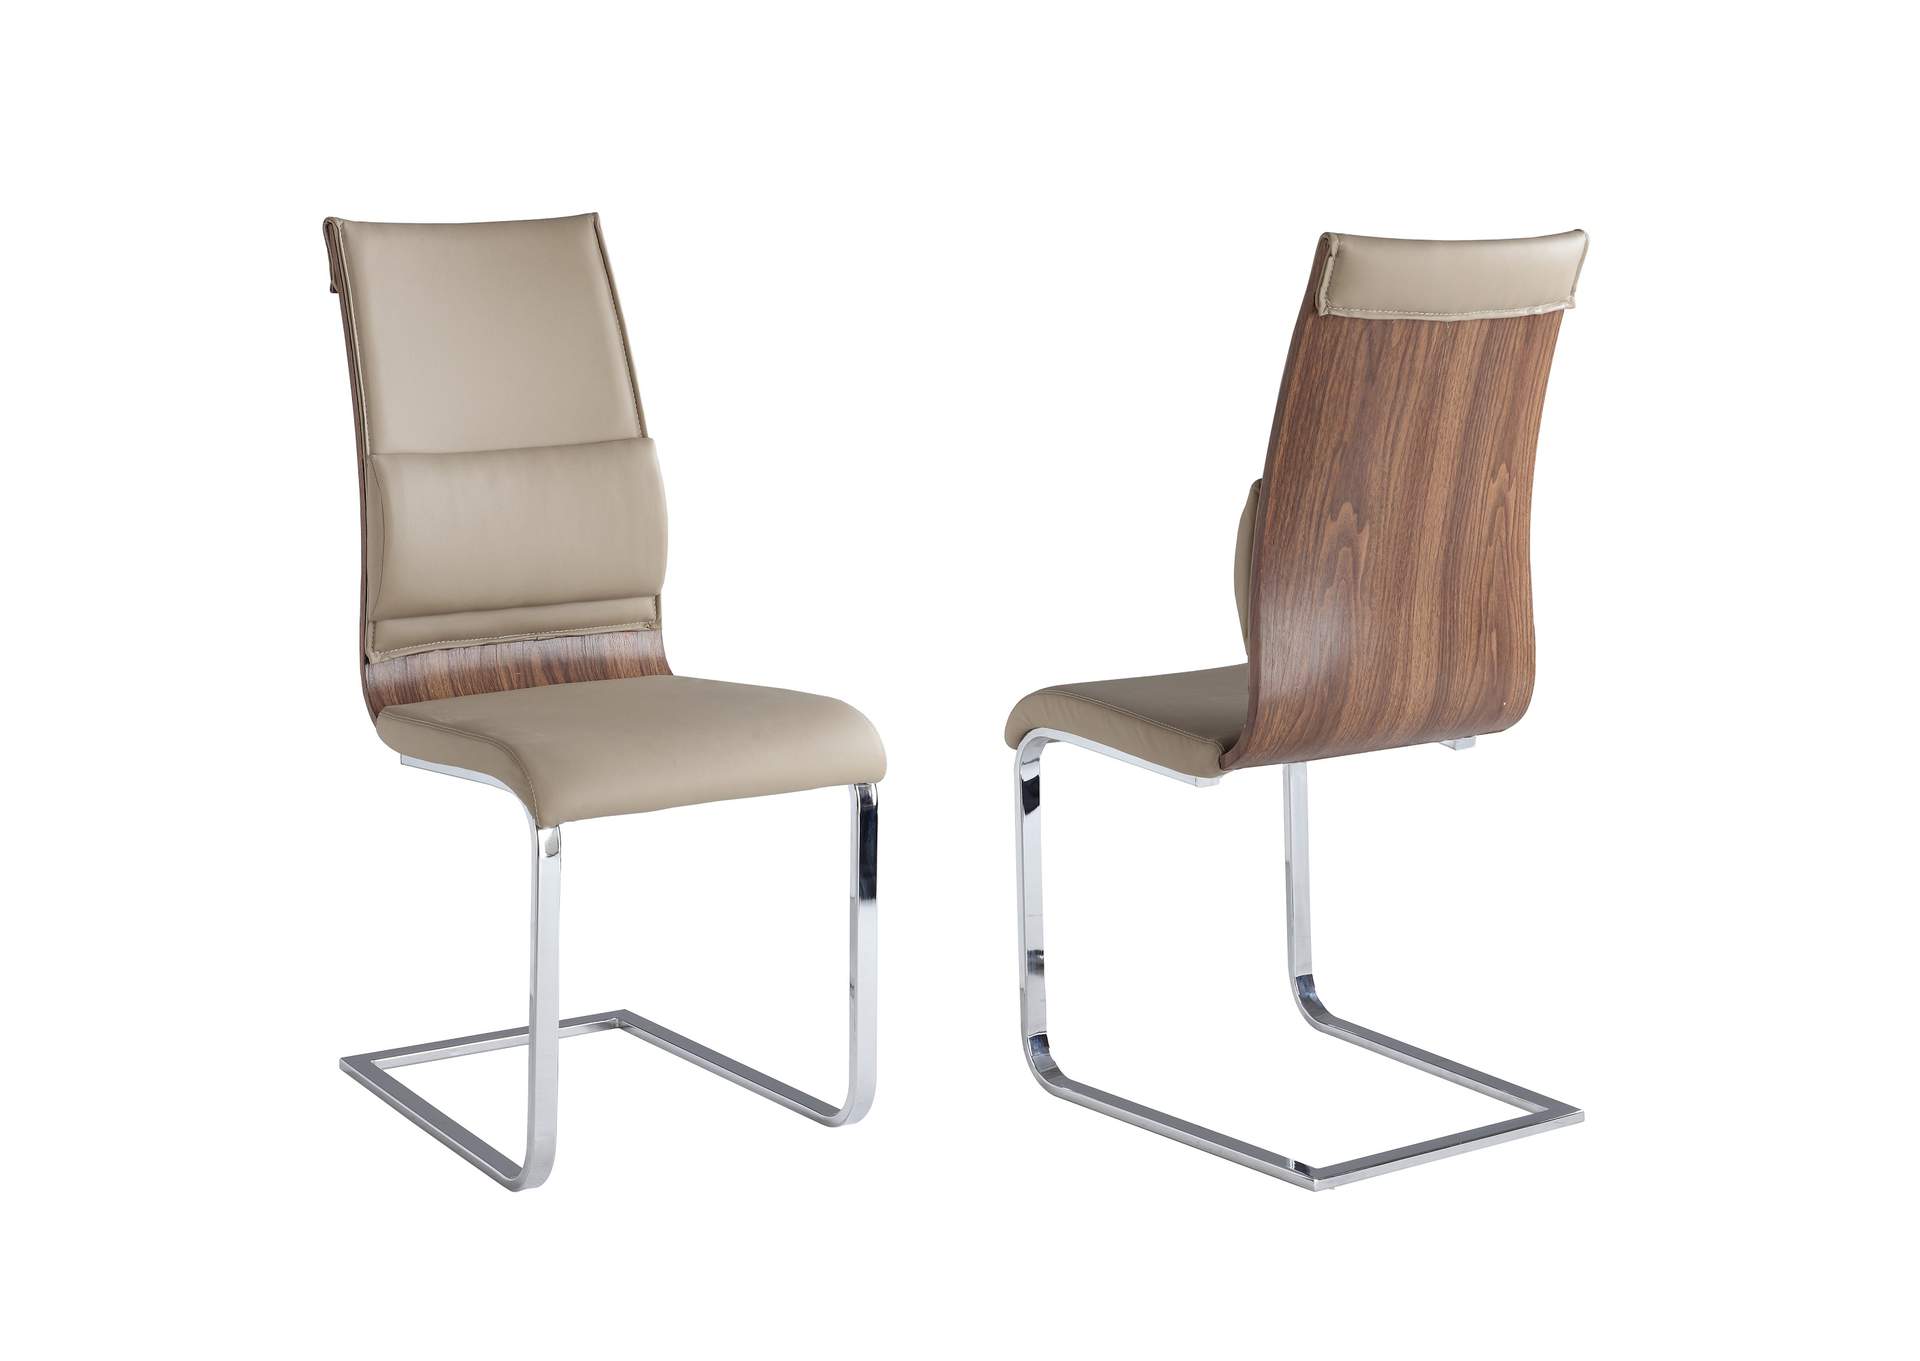 Cantilever Side Chair w/ Back Cushion,Chintaly Imports